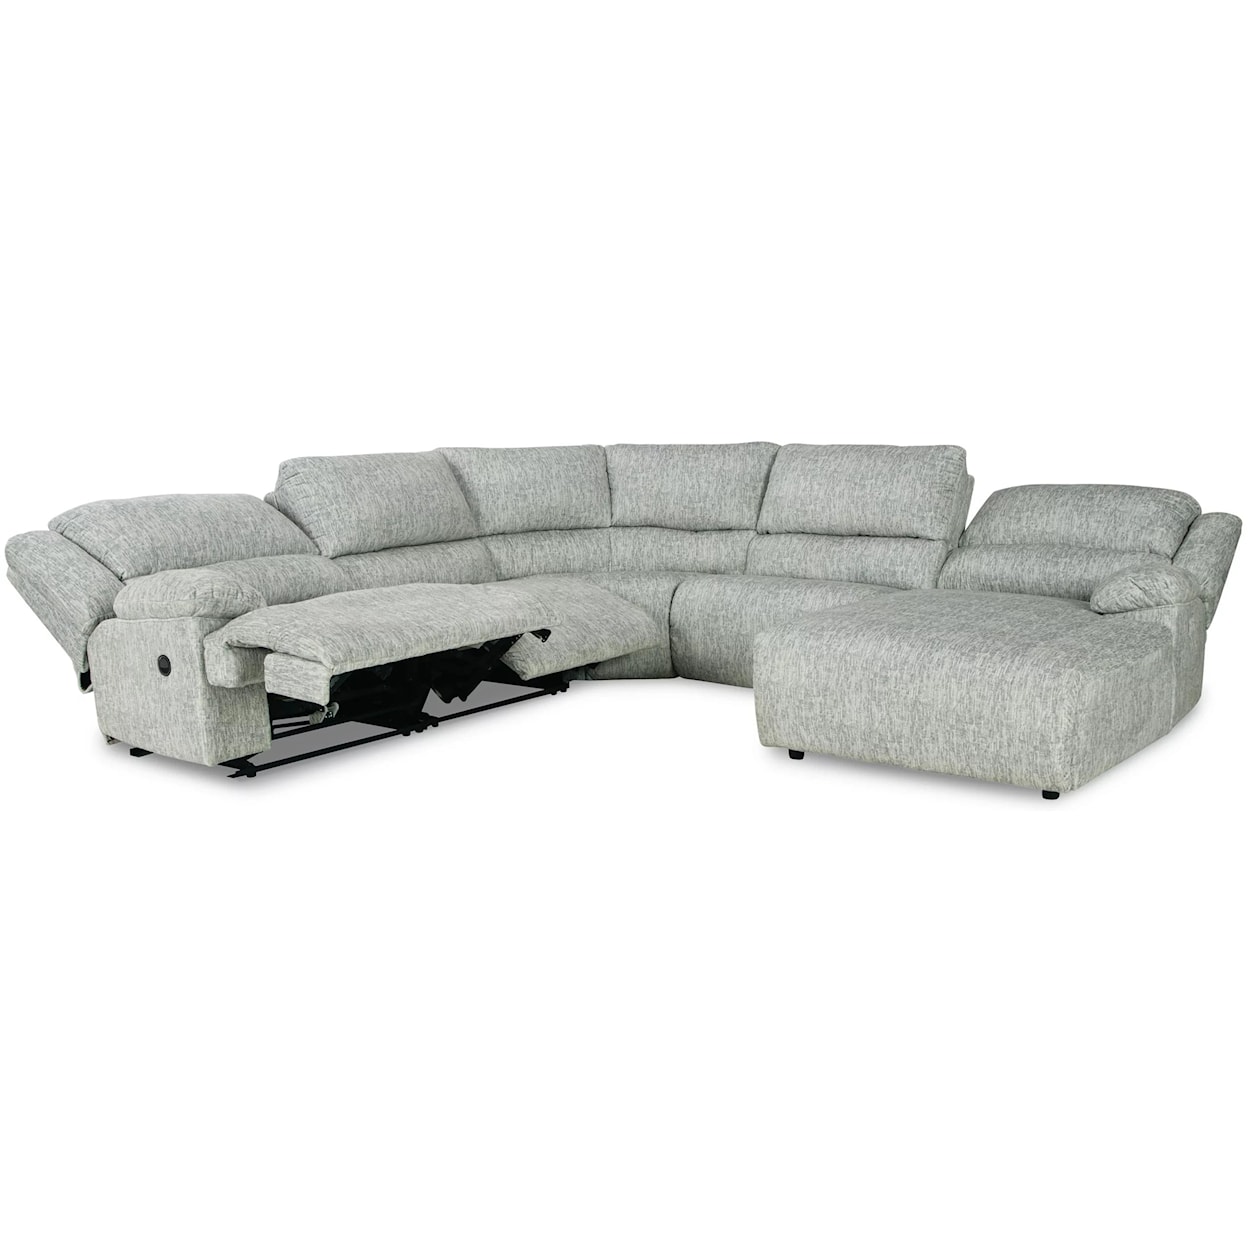 Ashley Signature Design McClelland 5-Piece Reclining Sectional with Chaise